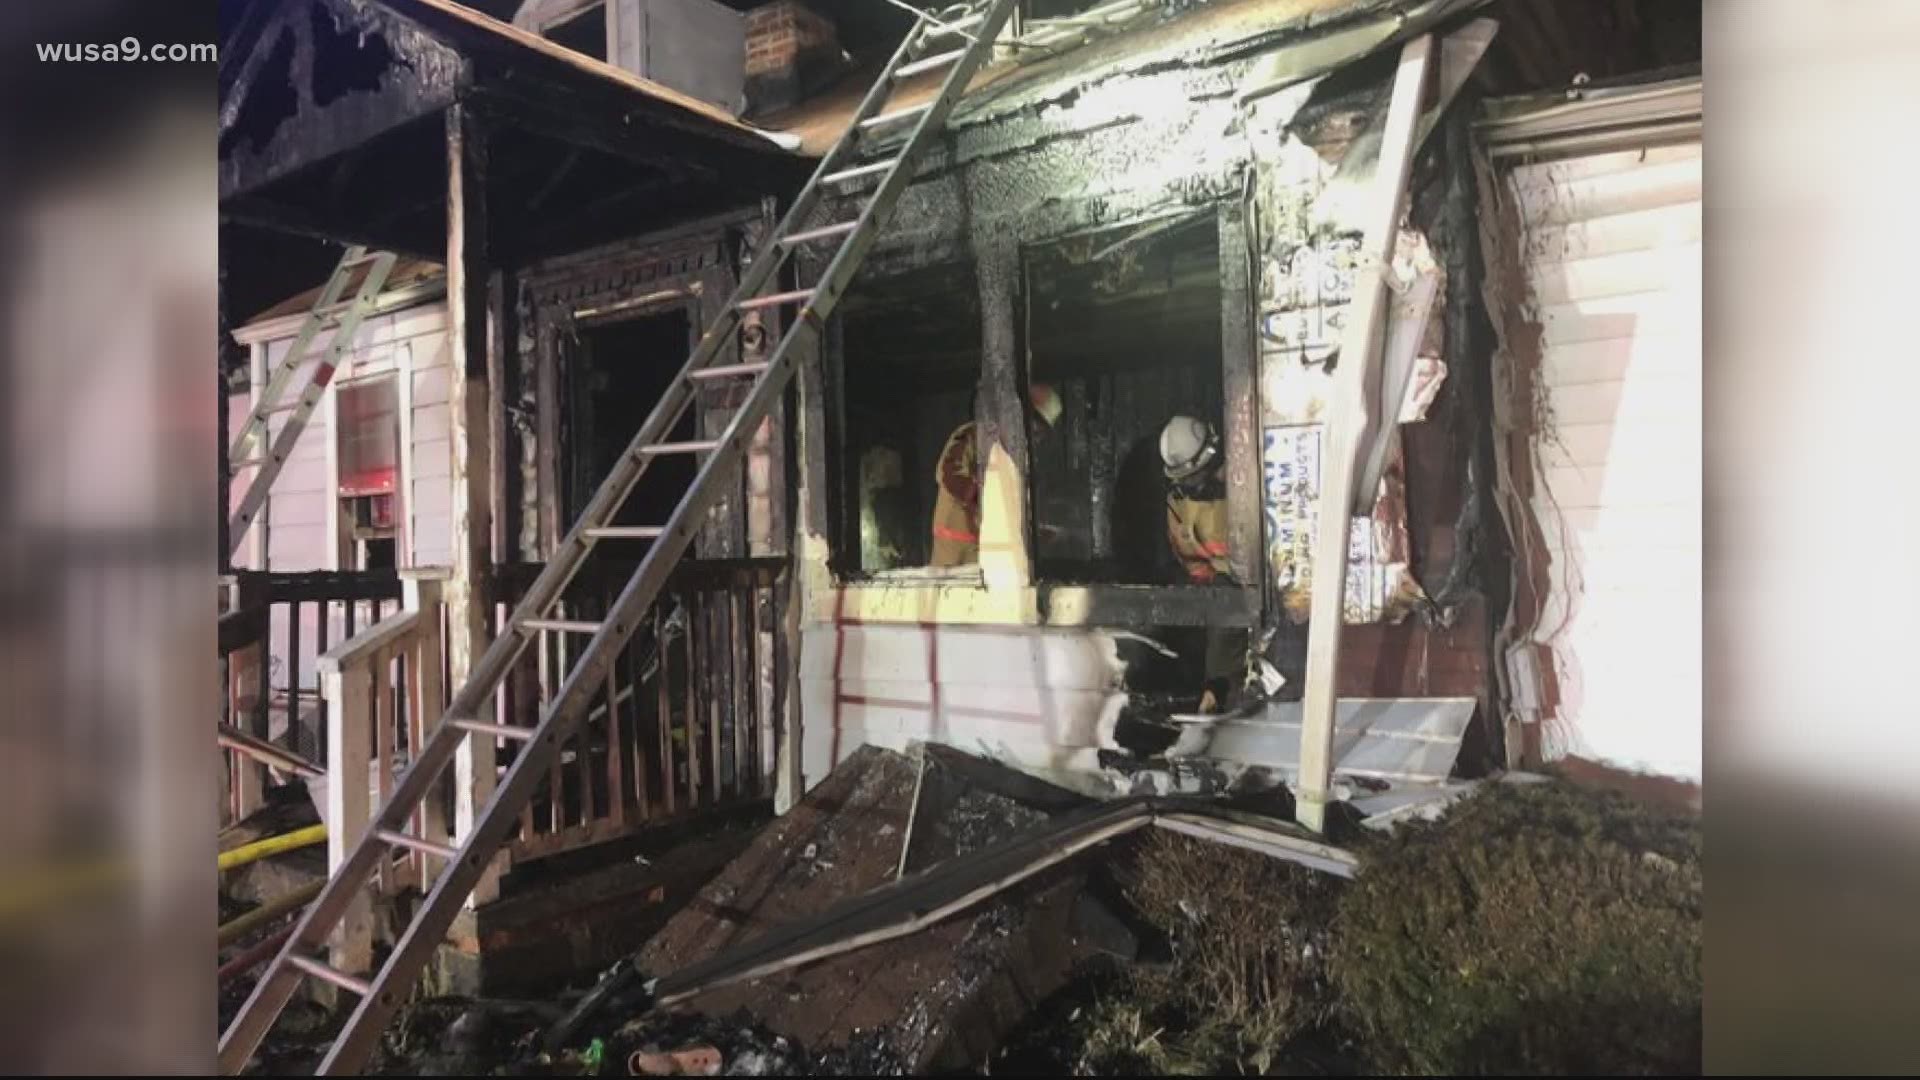 A woman and two dogs died in a fire on Darnestown Road in Germantown Sunday night.